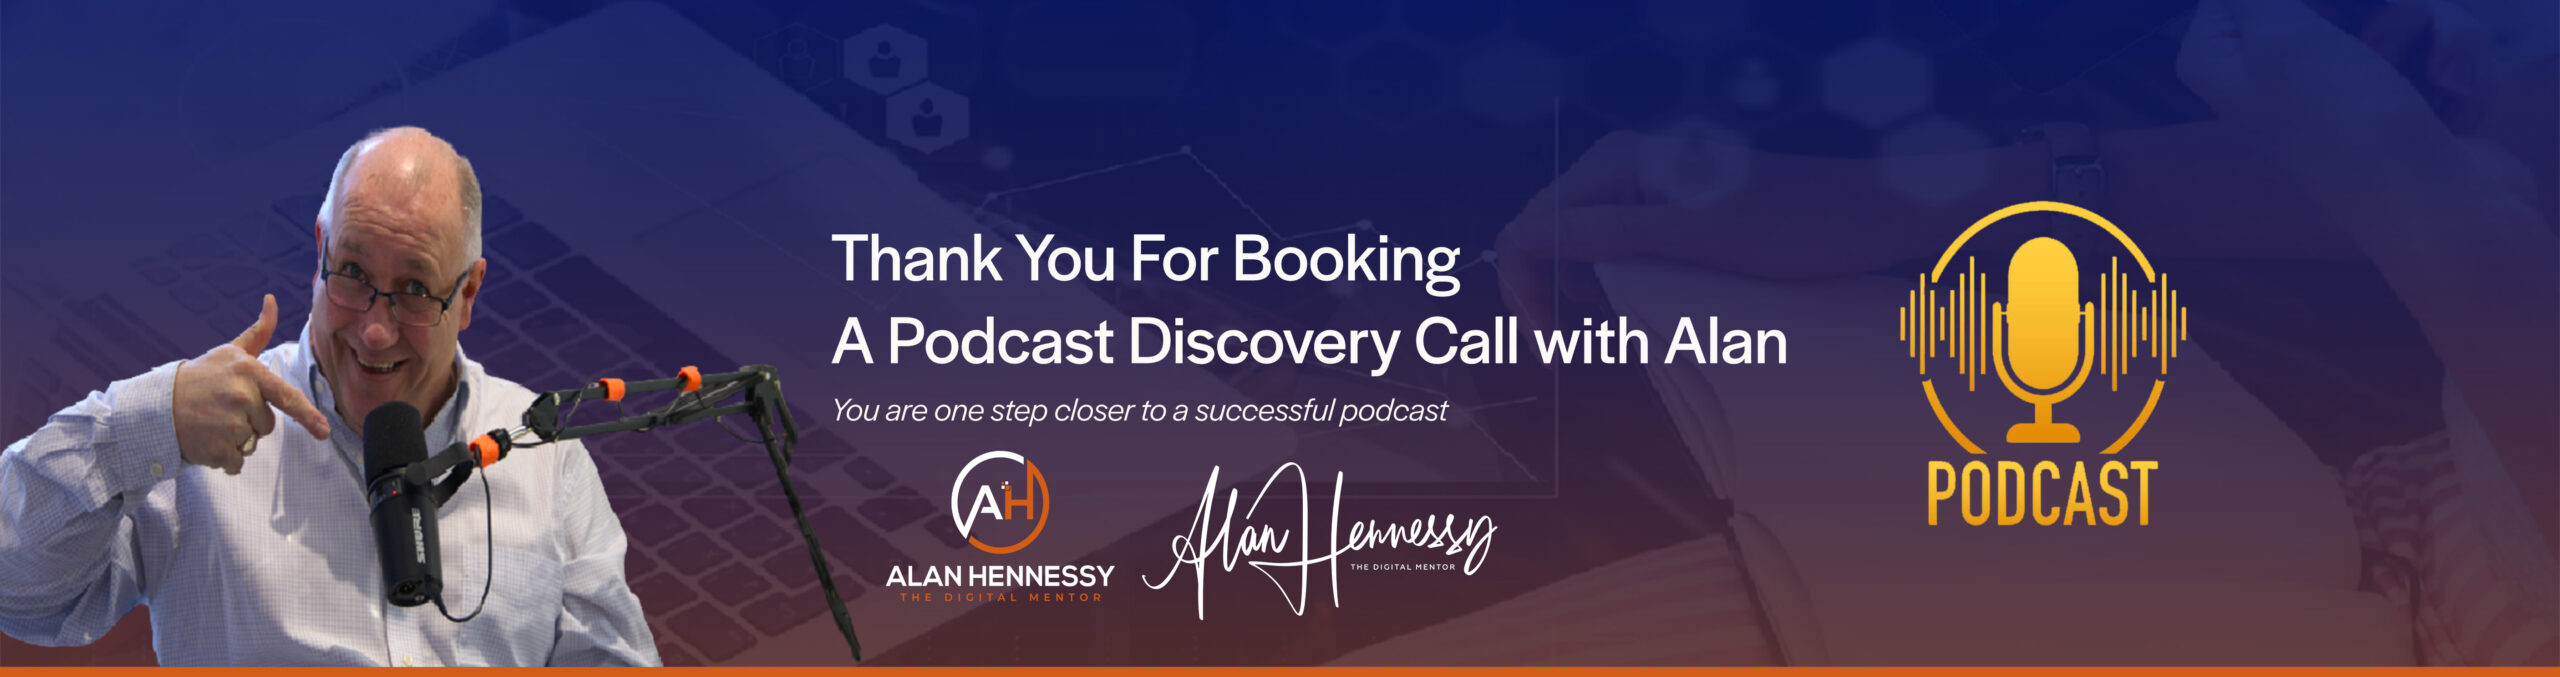 Podcast Discovery Call Confirmation